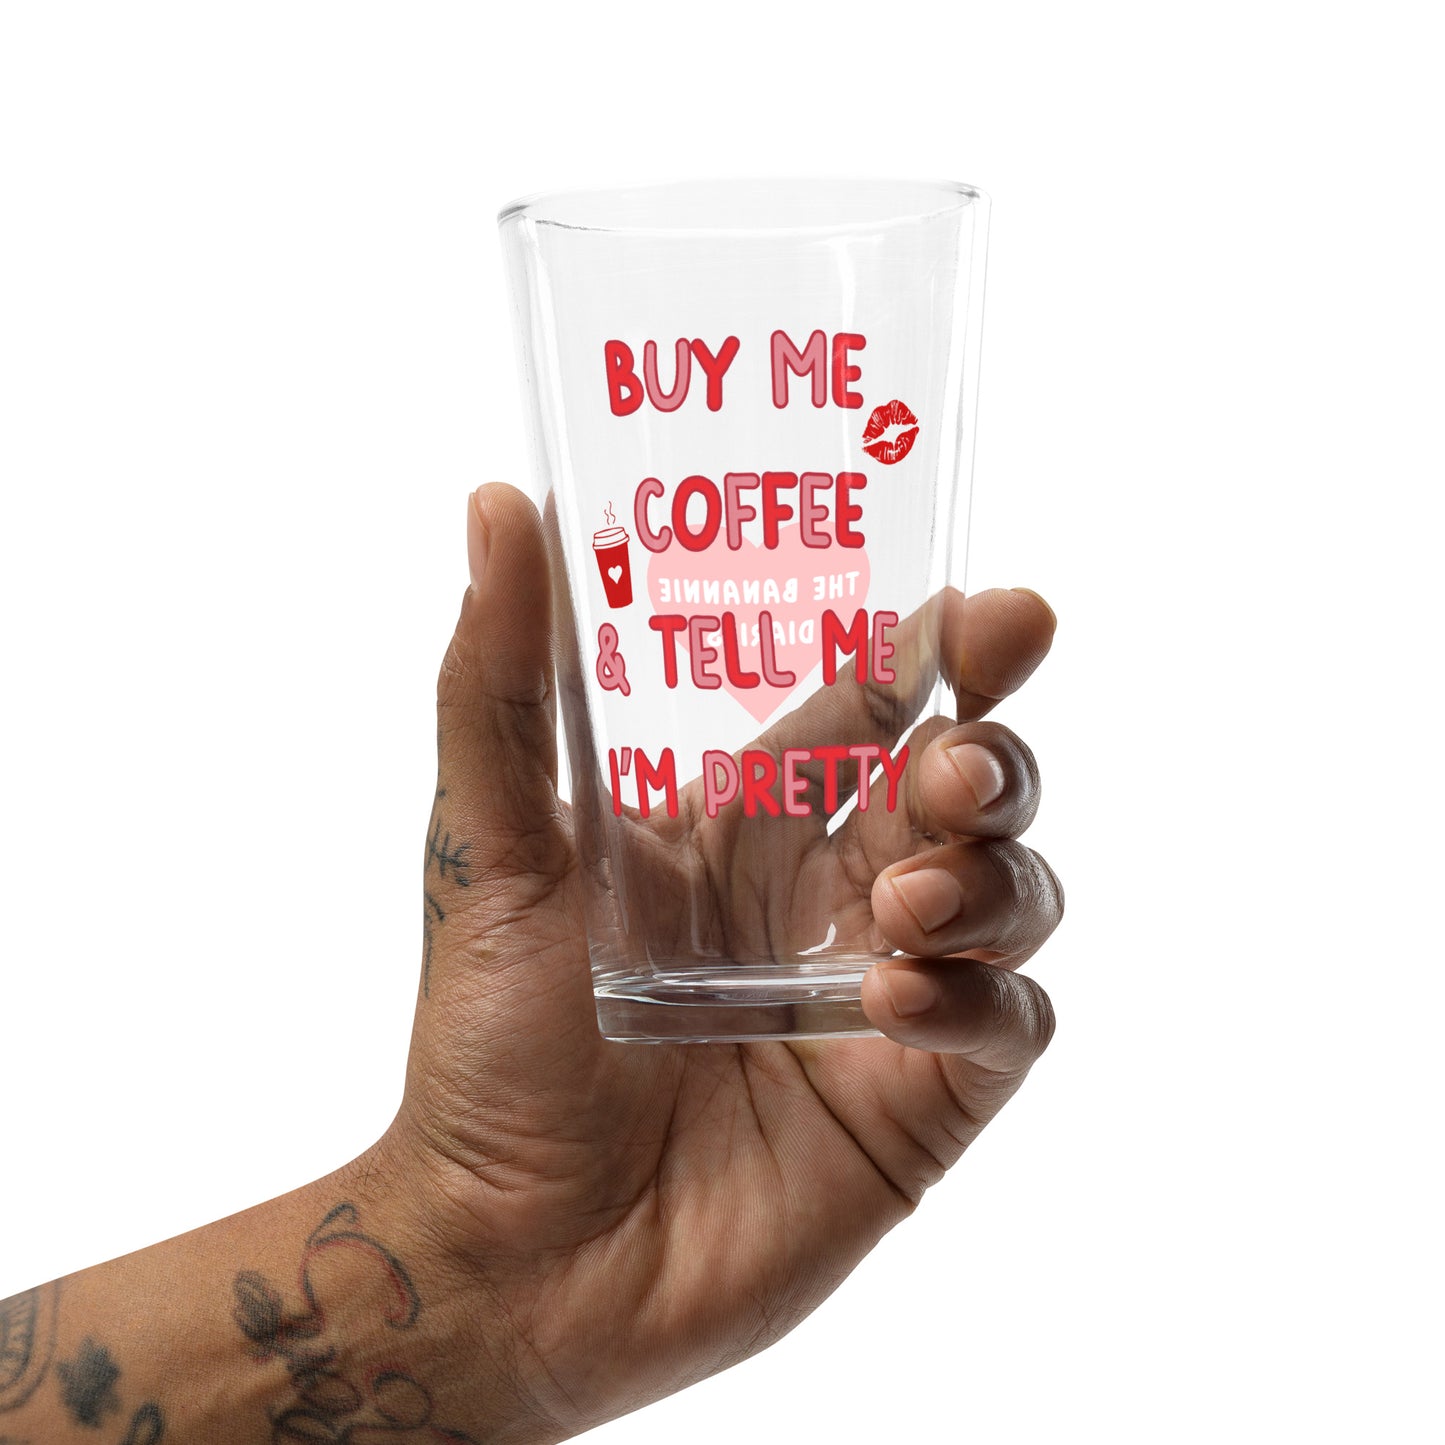 Buy Me Coffee and Tell Me I'm Pretty - Pint Glass,  by The Banannie Diaries - Volume: 16 oz. (473 ml), Glassware, Houseware